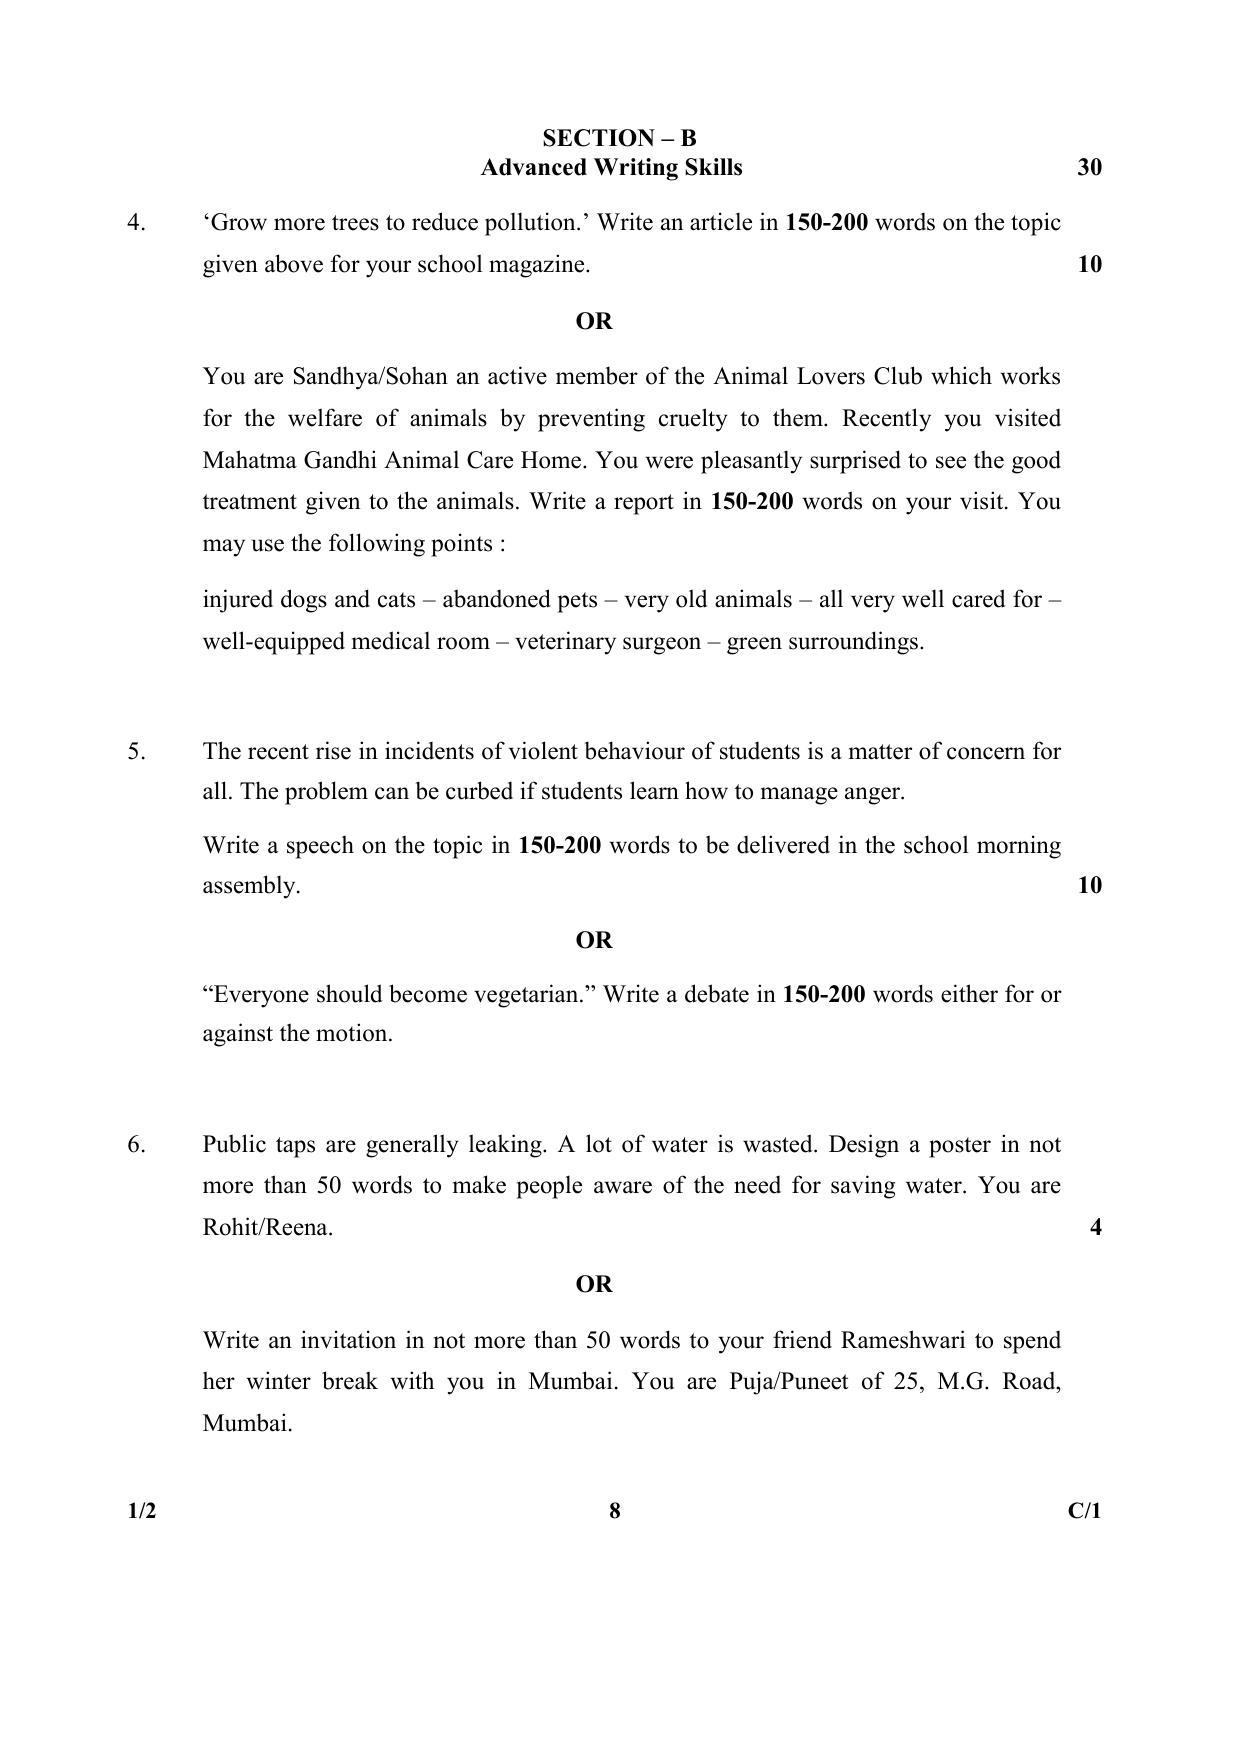 CBSE Class 12 1-2(English Core) 2018 Compartment Question Paper - Page 8